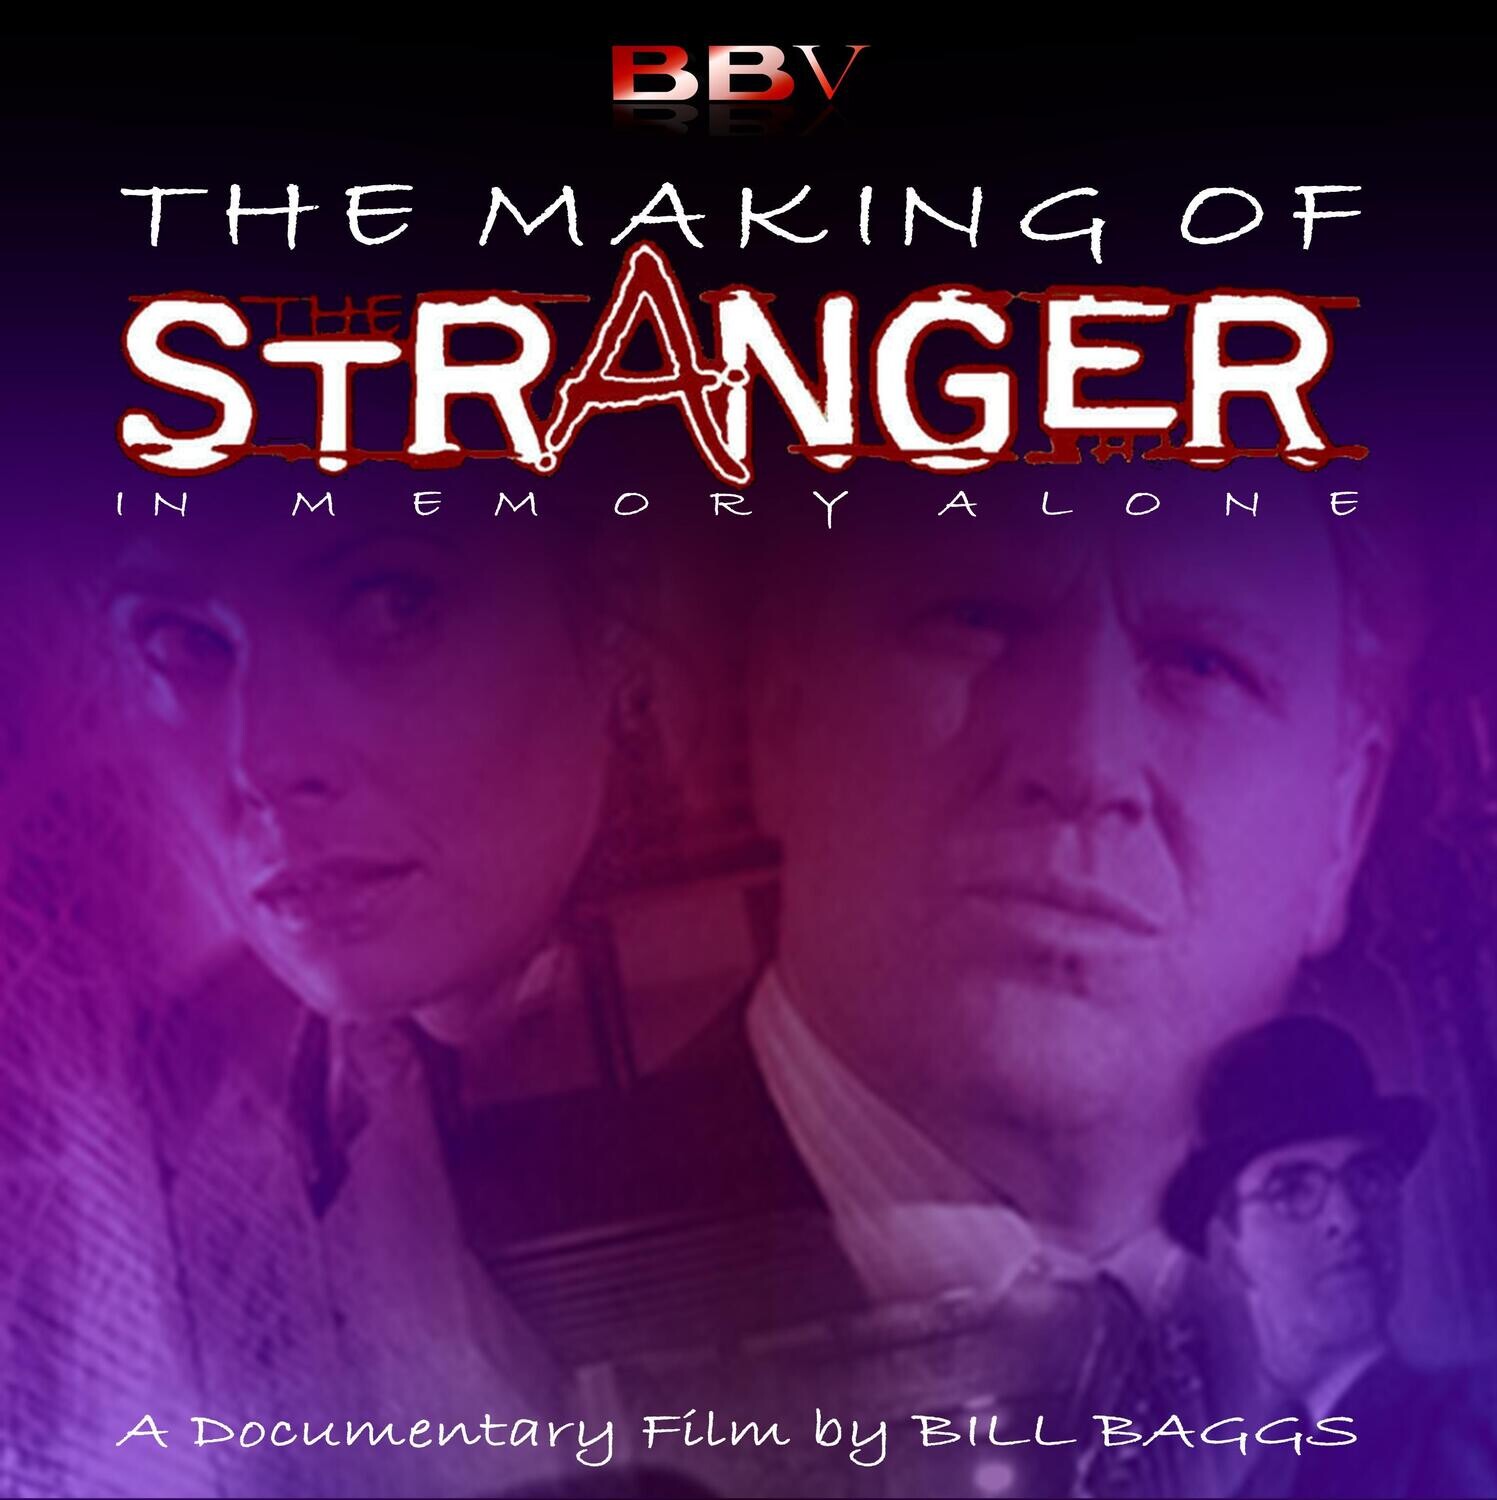 The Stranger: MAKING OF - In Memory Alone (DOWNLOAD)